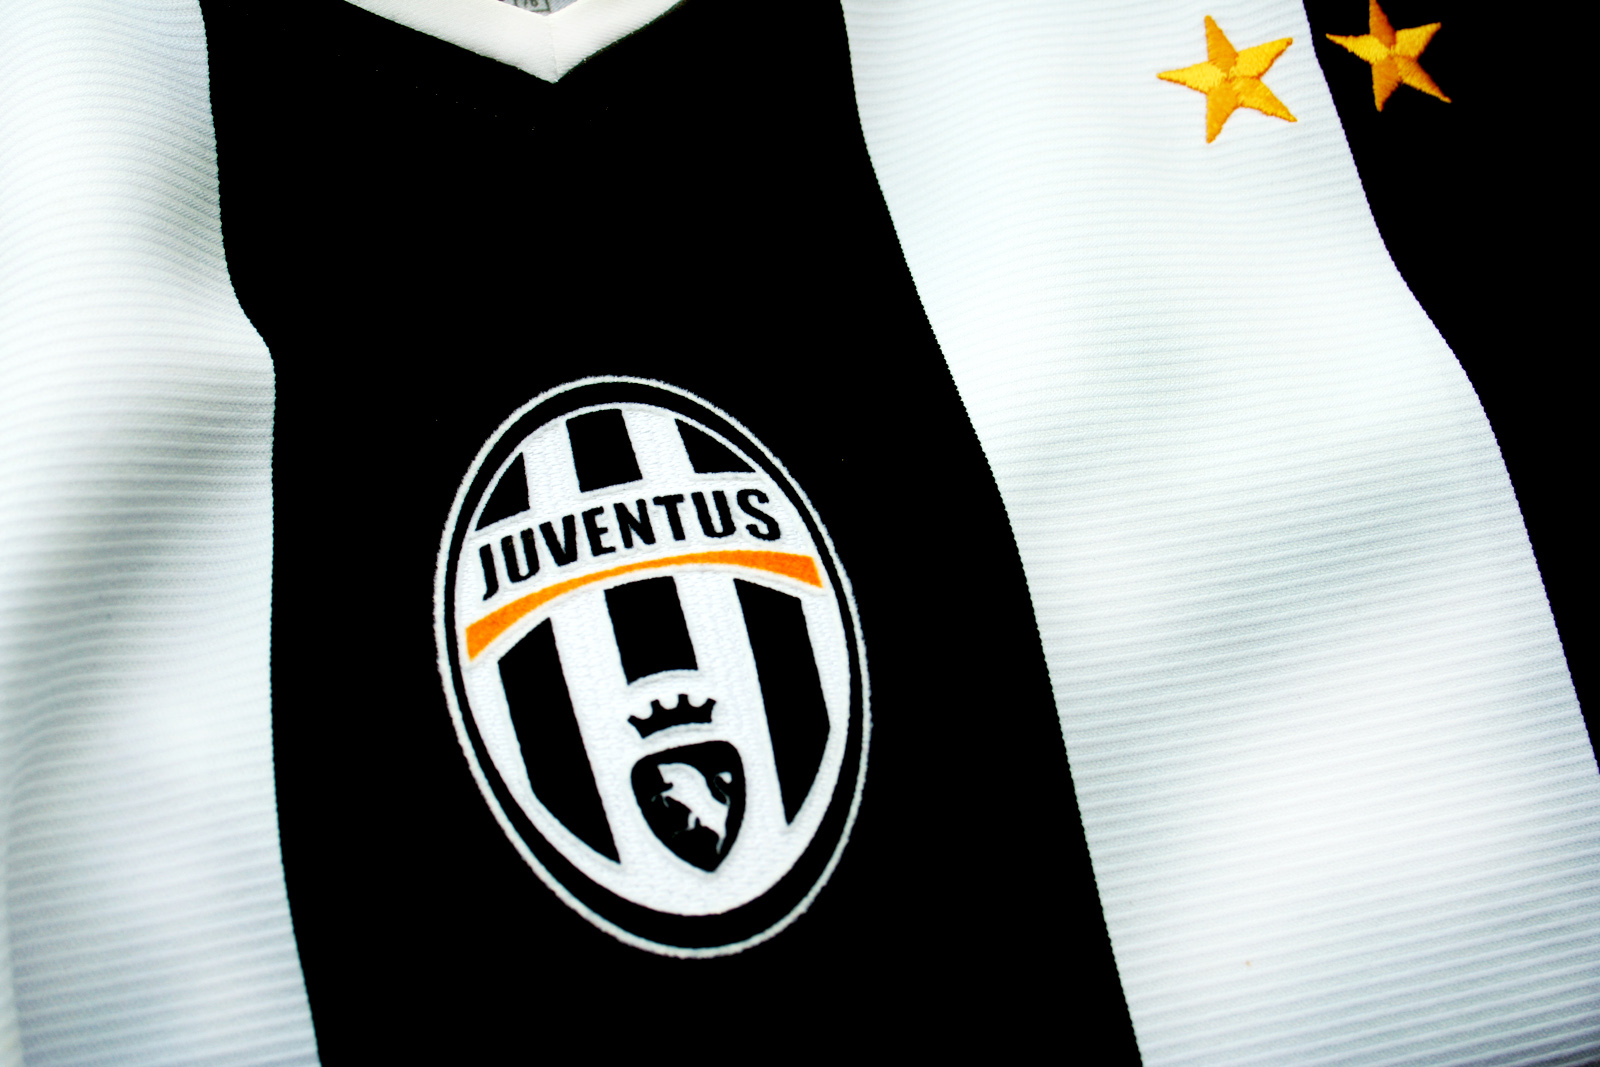  Juventus  FC Logo HD  Wallpapers  HD  Wallpapers  Backgrounds  